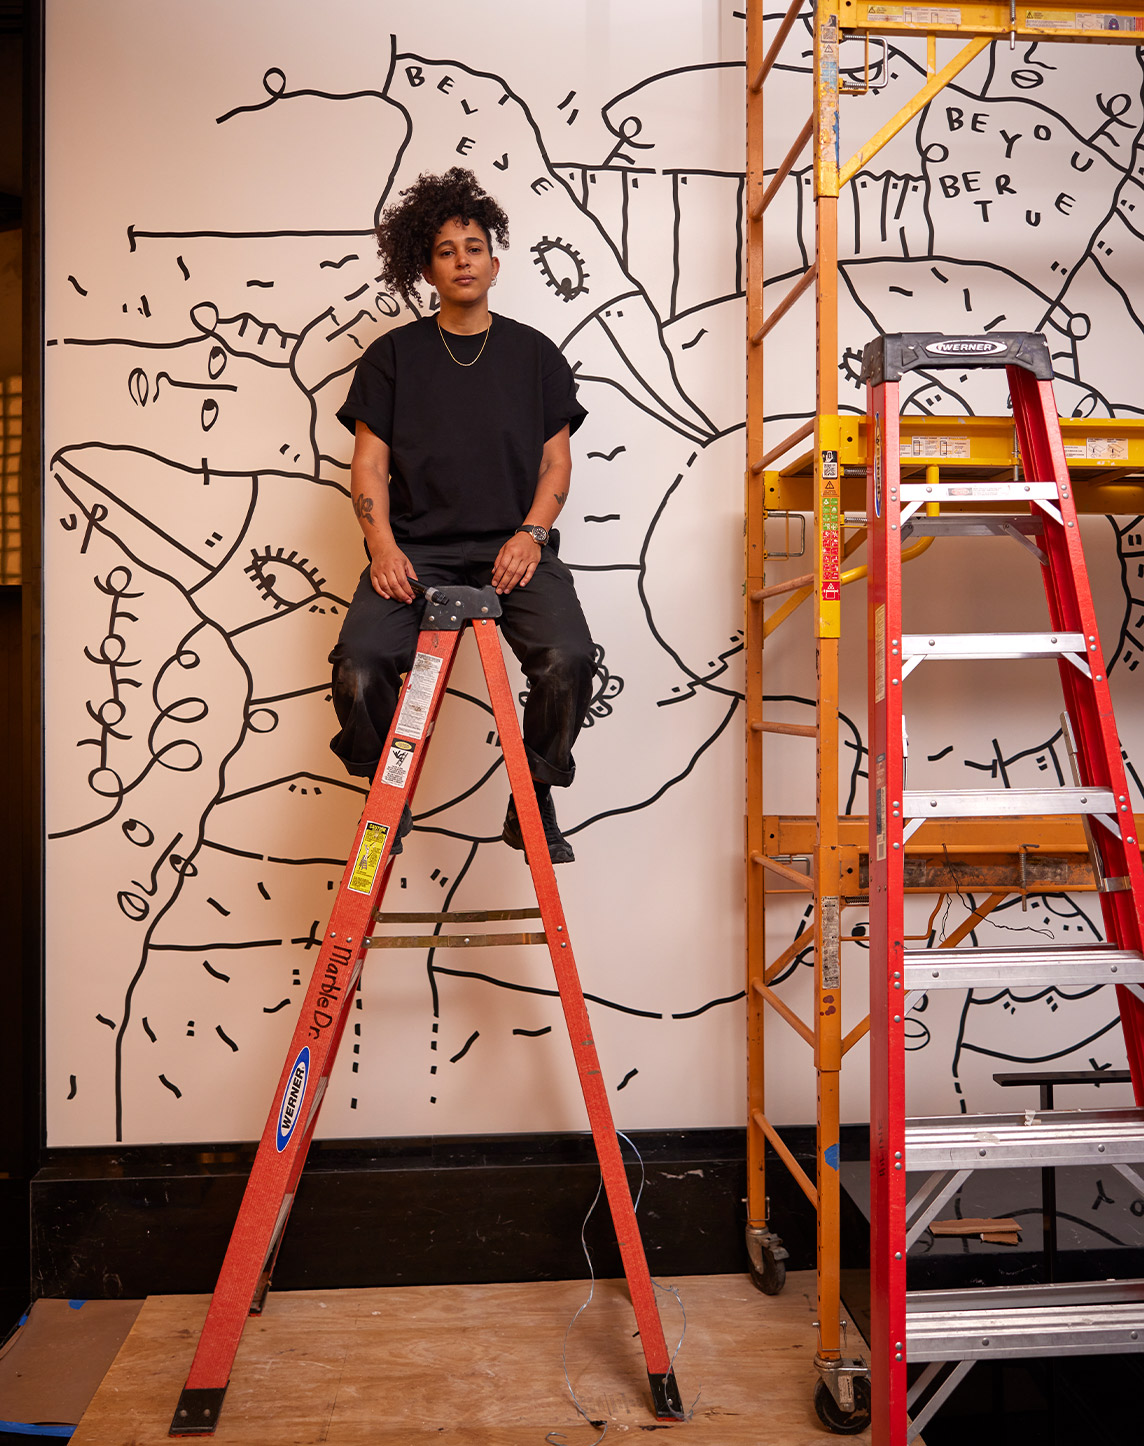 An artist sits on a red ladder in front of a mural featuring abstract black line drawings on a white wall, flanked by another ladder and painting tools.